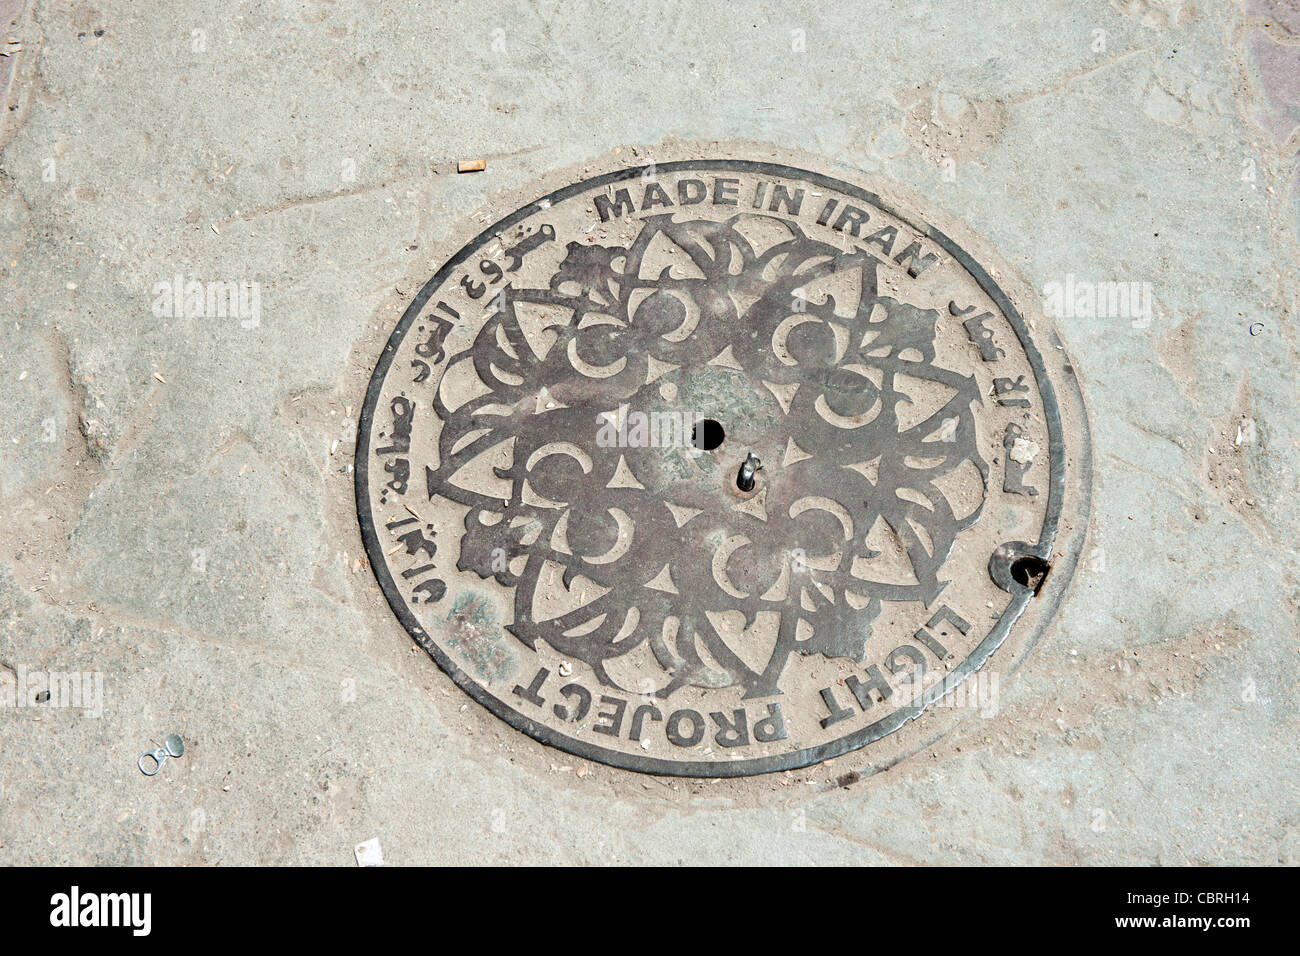 Manhole cover by the Imam Husein (Husayn) and Abbas shrines in the holy Shia city of Kerbala, Iraq Stock Photo